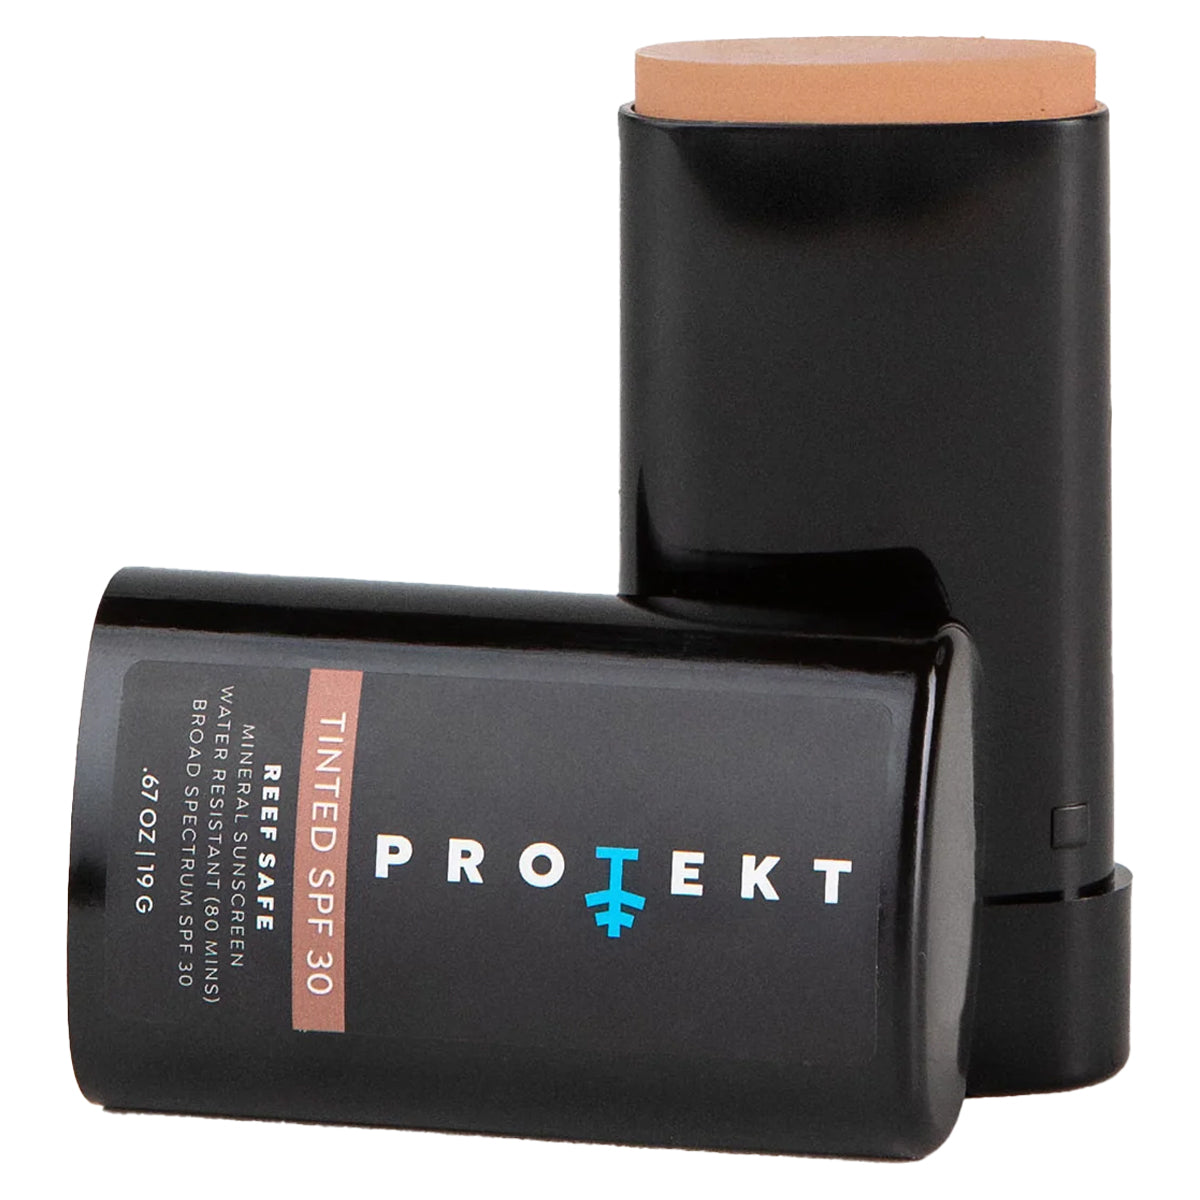 Protekt SPF30 Mineral Sunscreen Stick in tinted by GOHUNT | Protekt - GOHUNT Shop